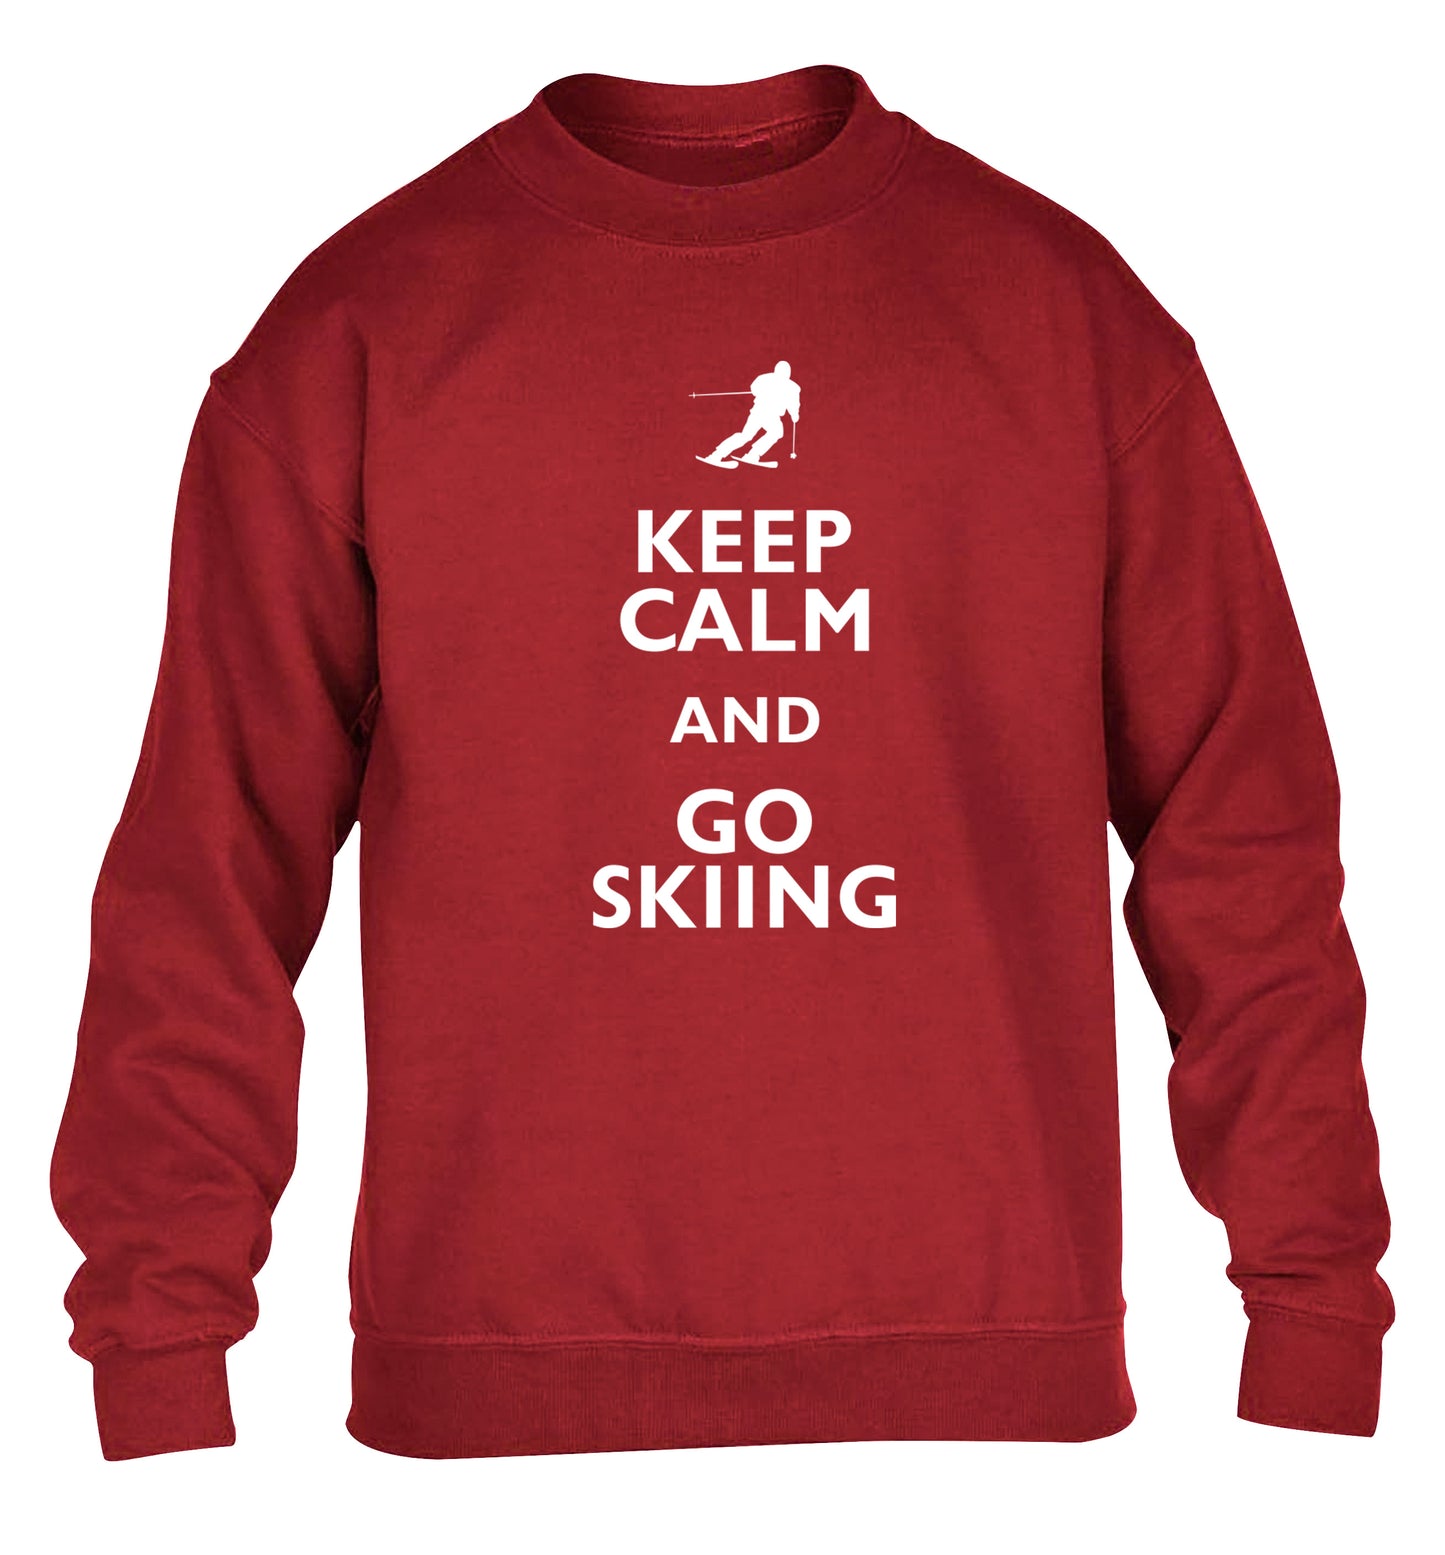 Keep calm and go skiing children's grey sweater 12-14 Years